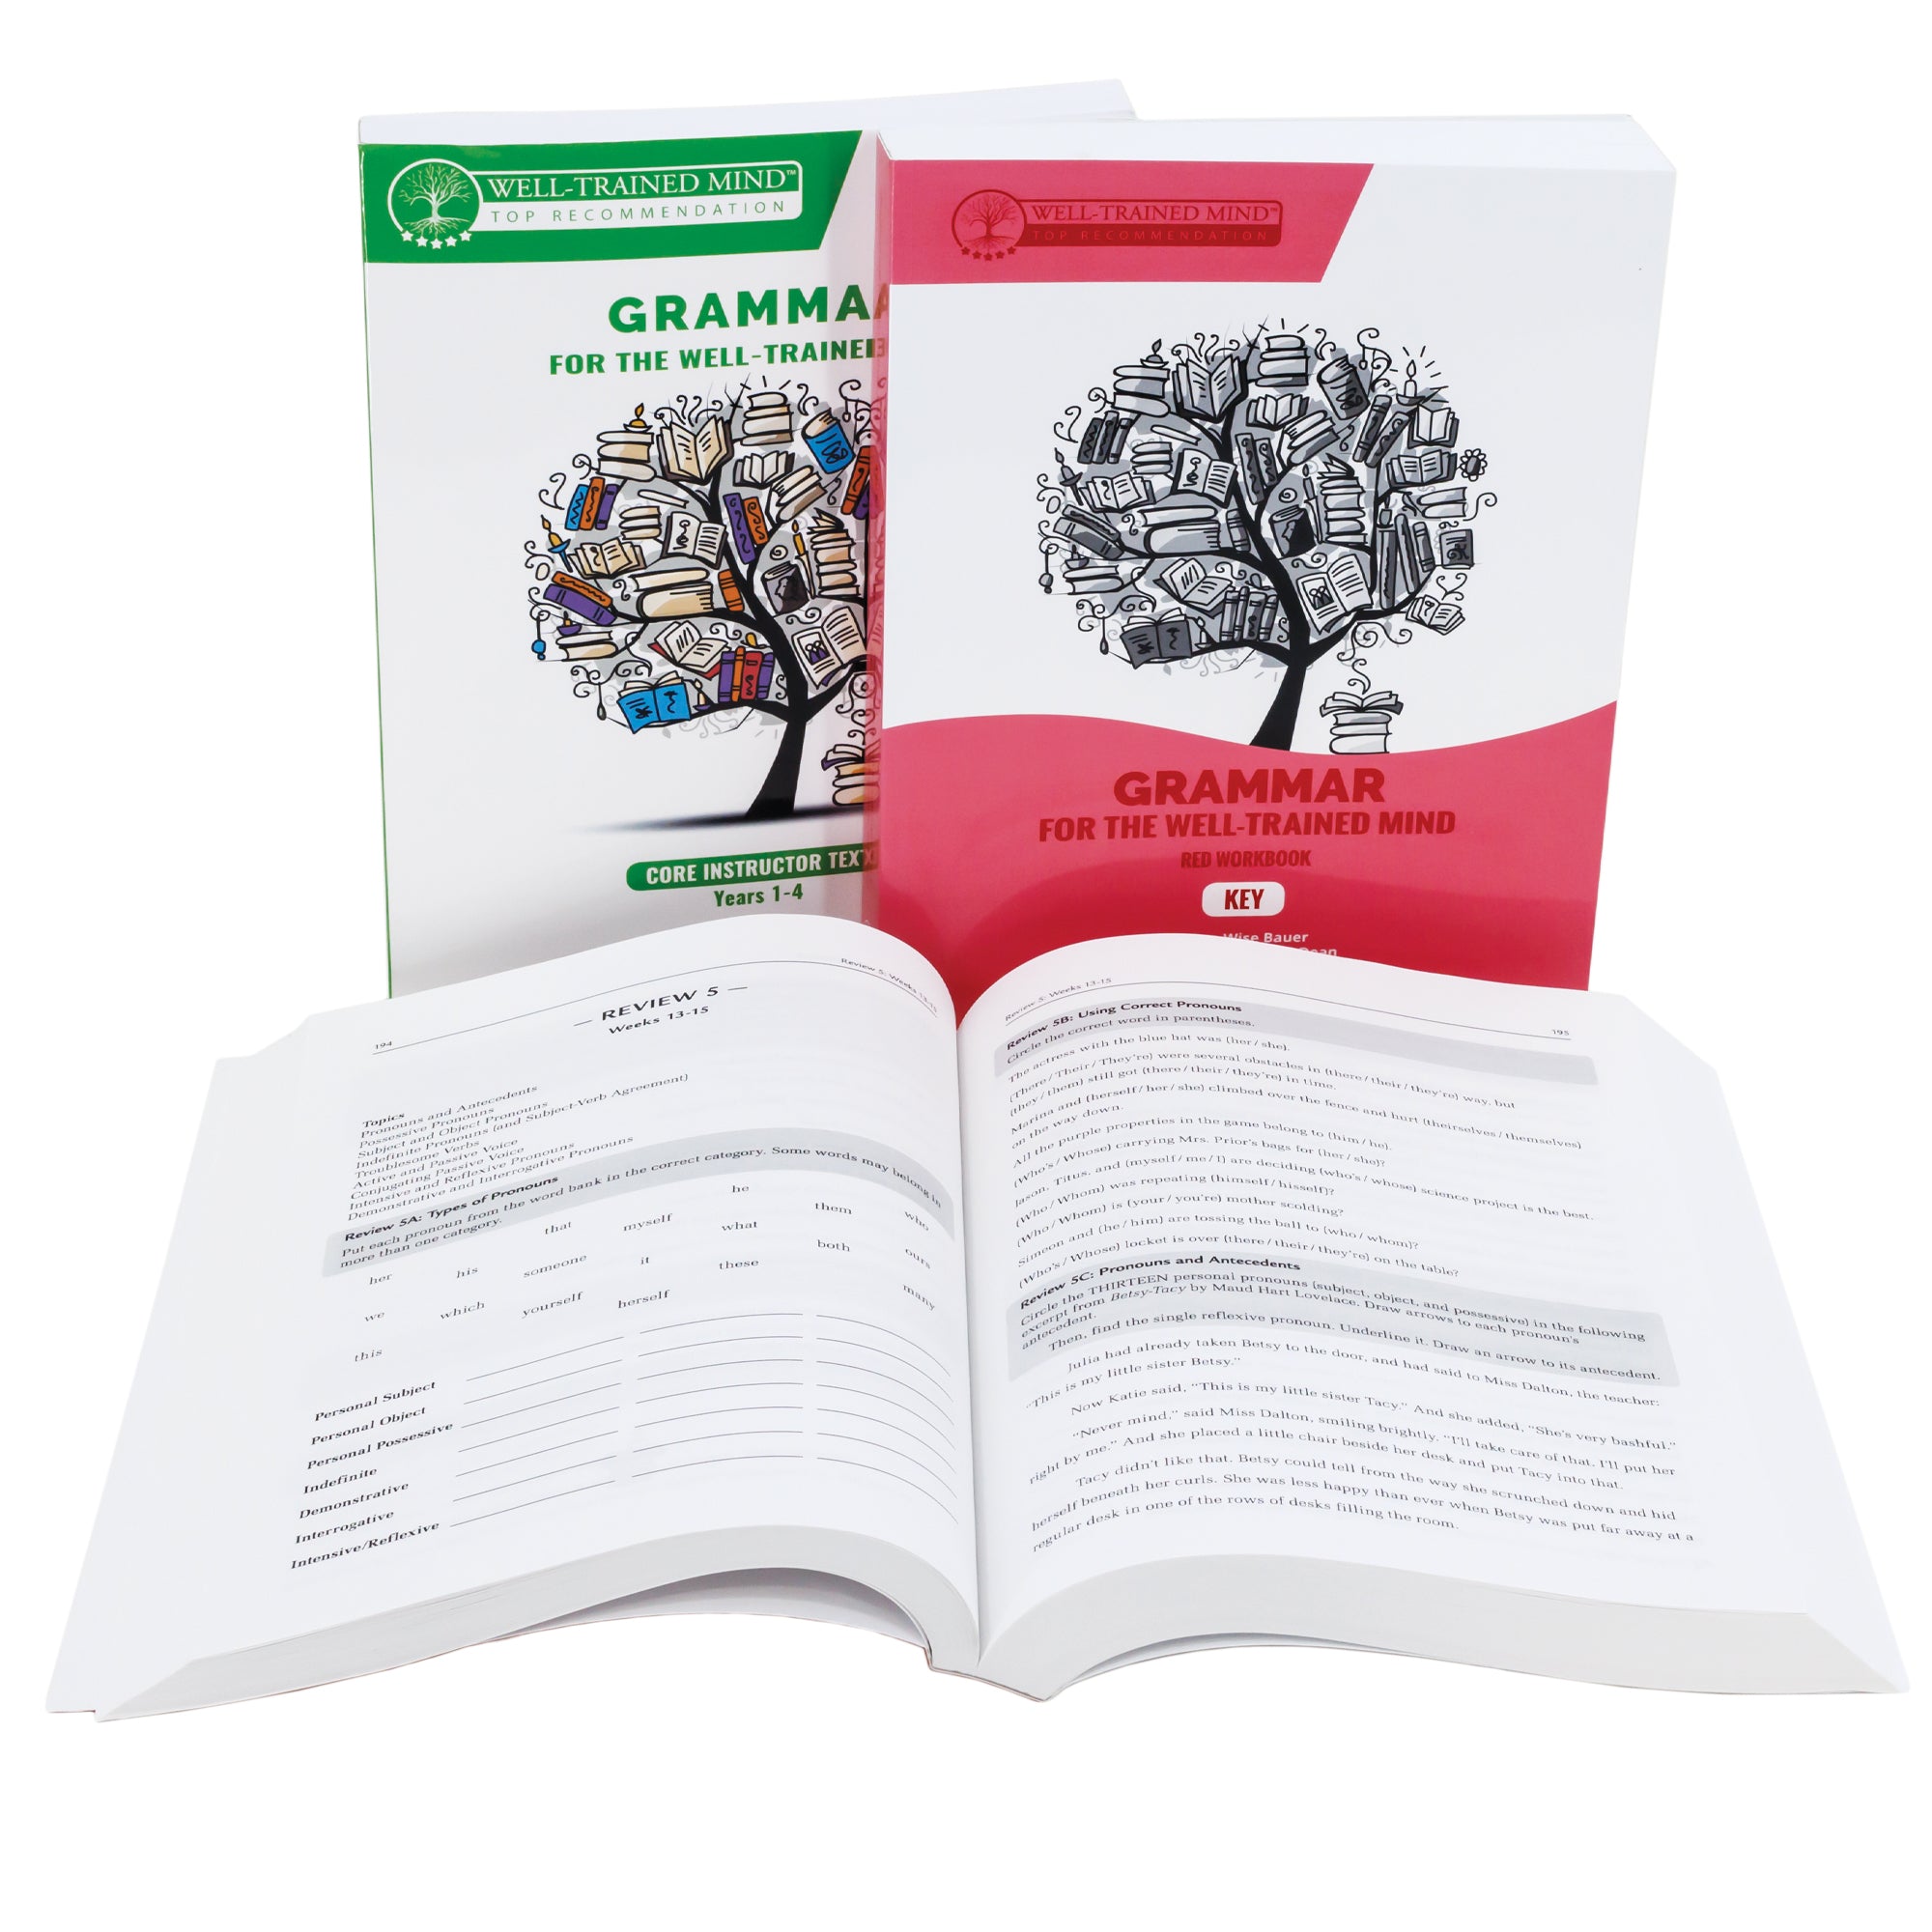 Grammar for the Well-Trained Mind red bundle of 3 books. There are 2 books standing in the back and one book laid open in front of them, showing a review of lesson 5. The standing right book has a white top and pink-colored bottom with a wave shape between the 2 colors. There is an illustration in the white section of a tree with books for leaves and a stack of books near the trunk. In the pink section at the bottom is the title. Tucked behind the pink book is a green version of the book.